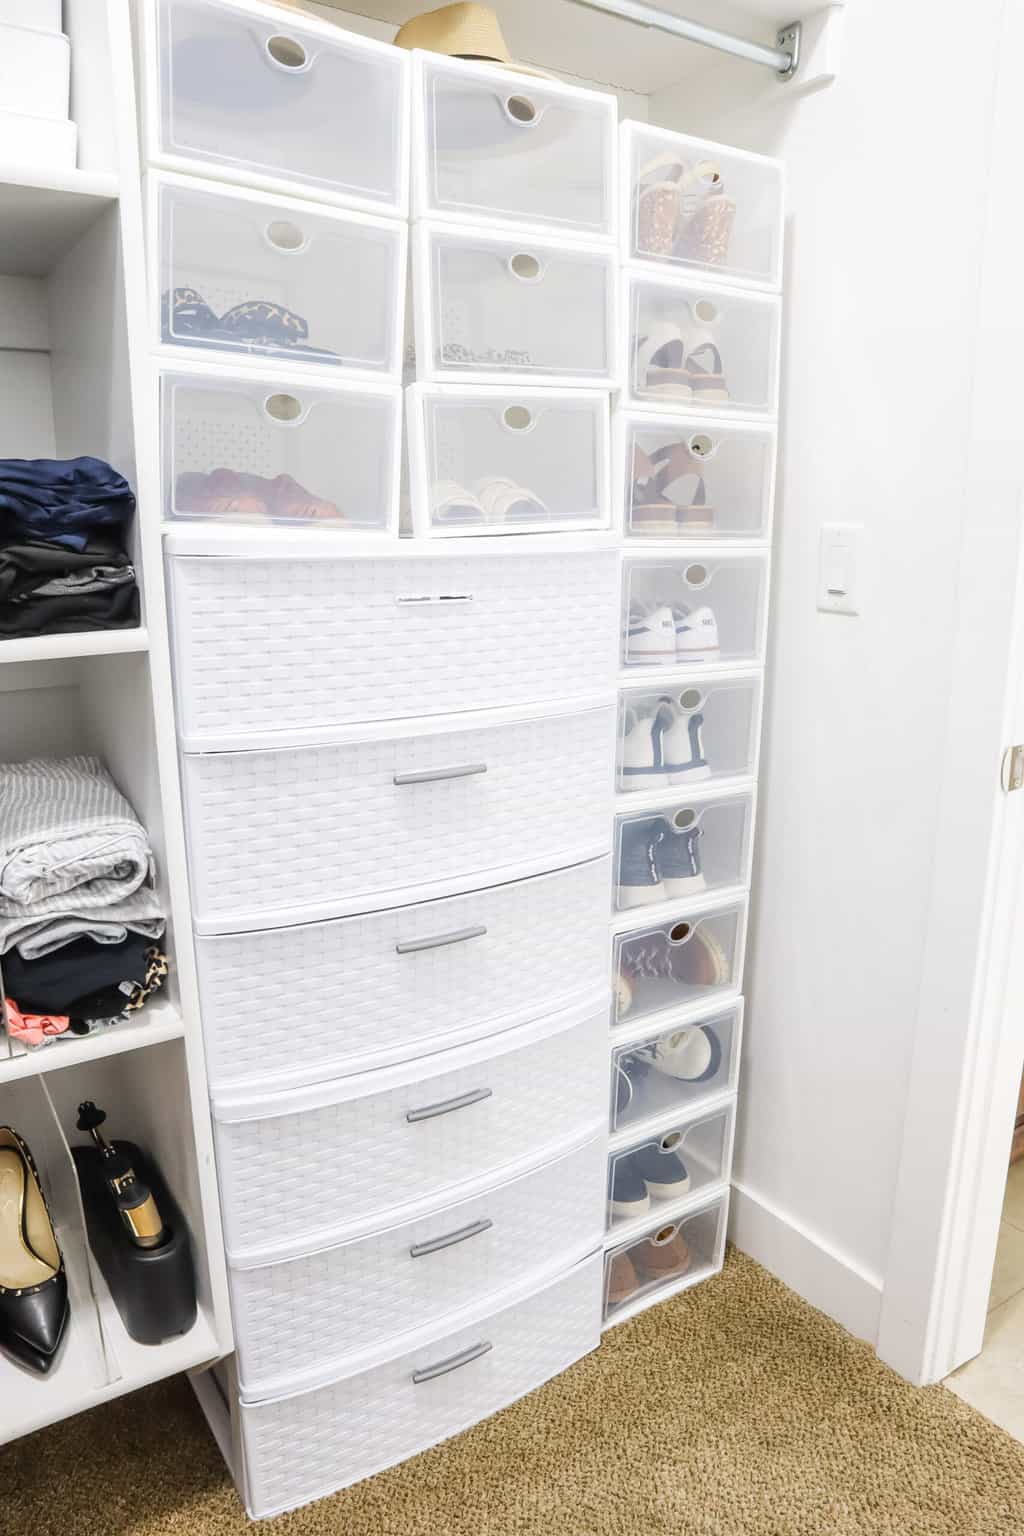 How to Organize Your Shoes: Tips From the Pros